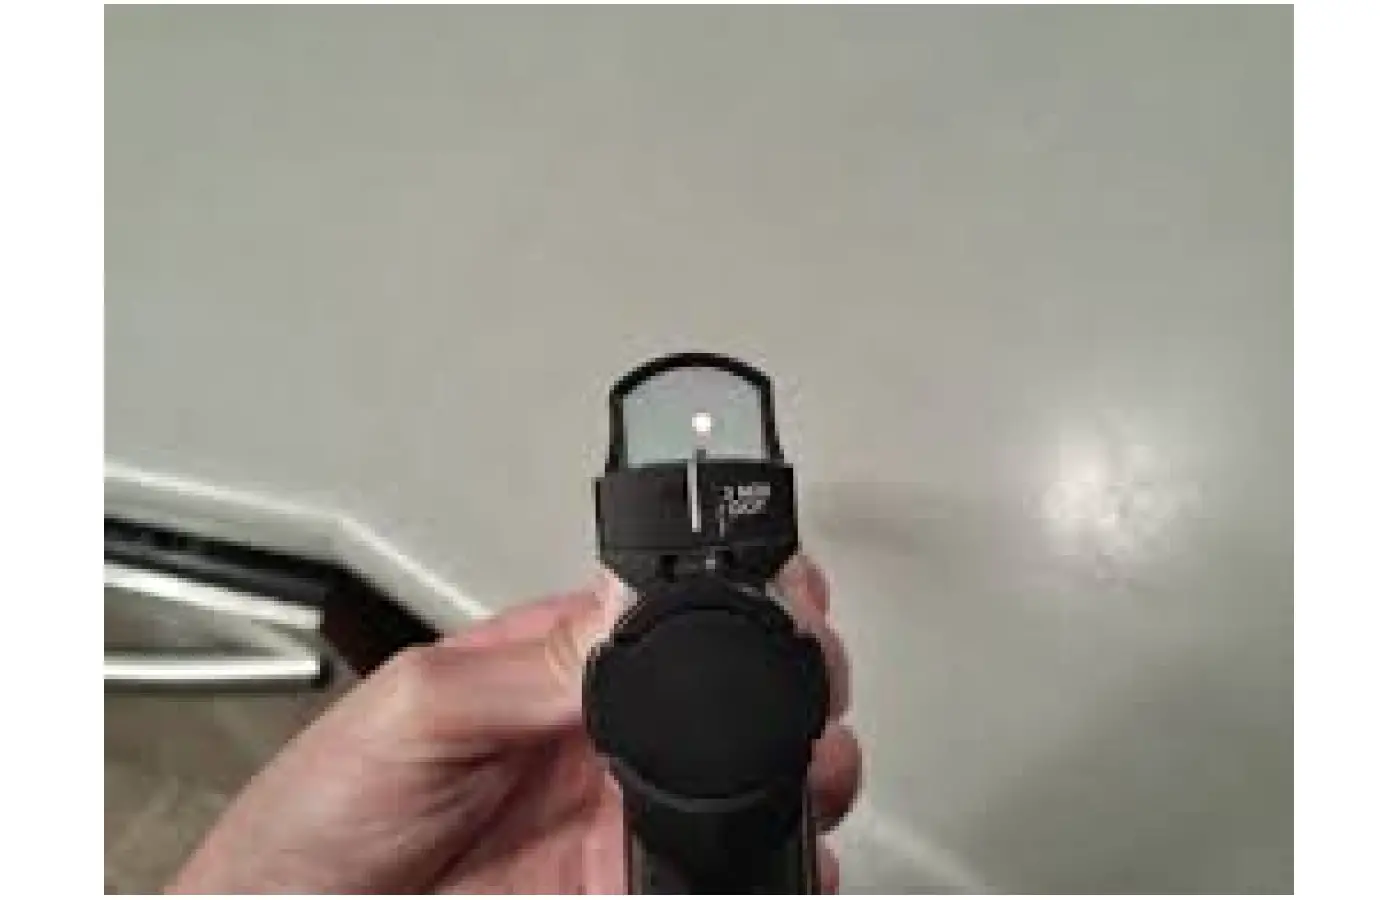 The Burris FastFire iii on a Ruger 22/45 with red dot sight